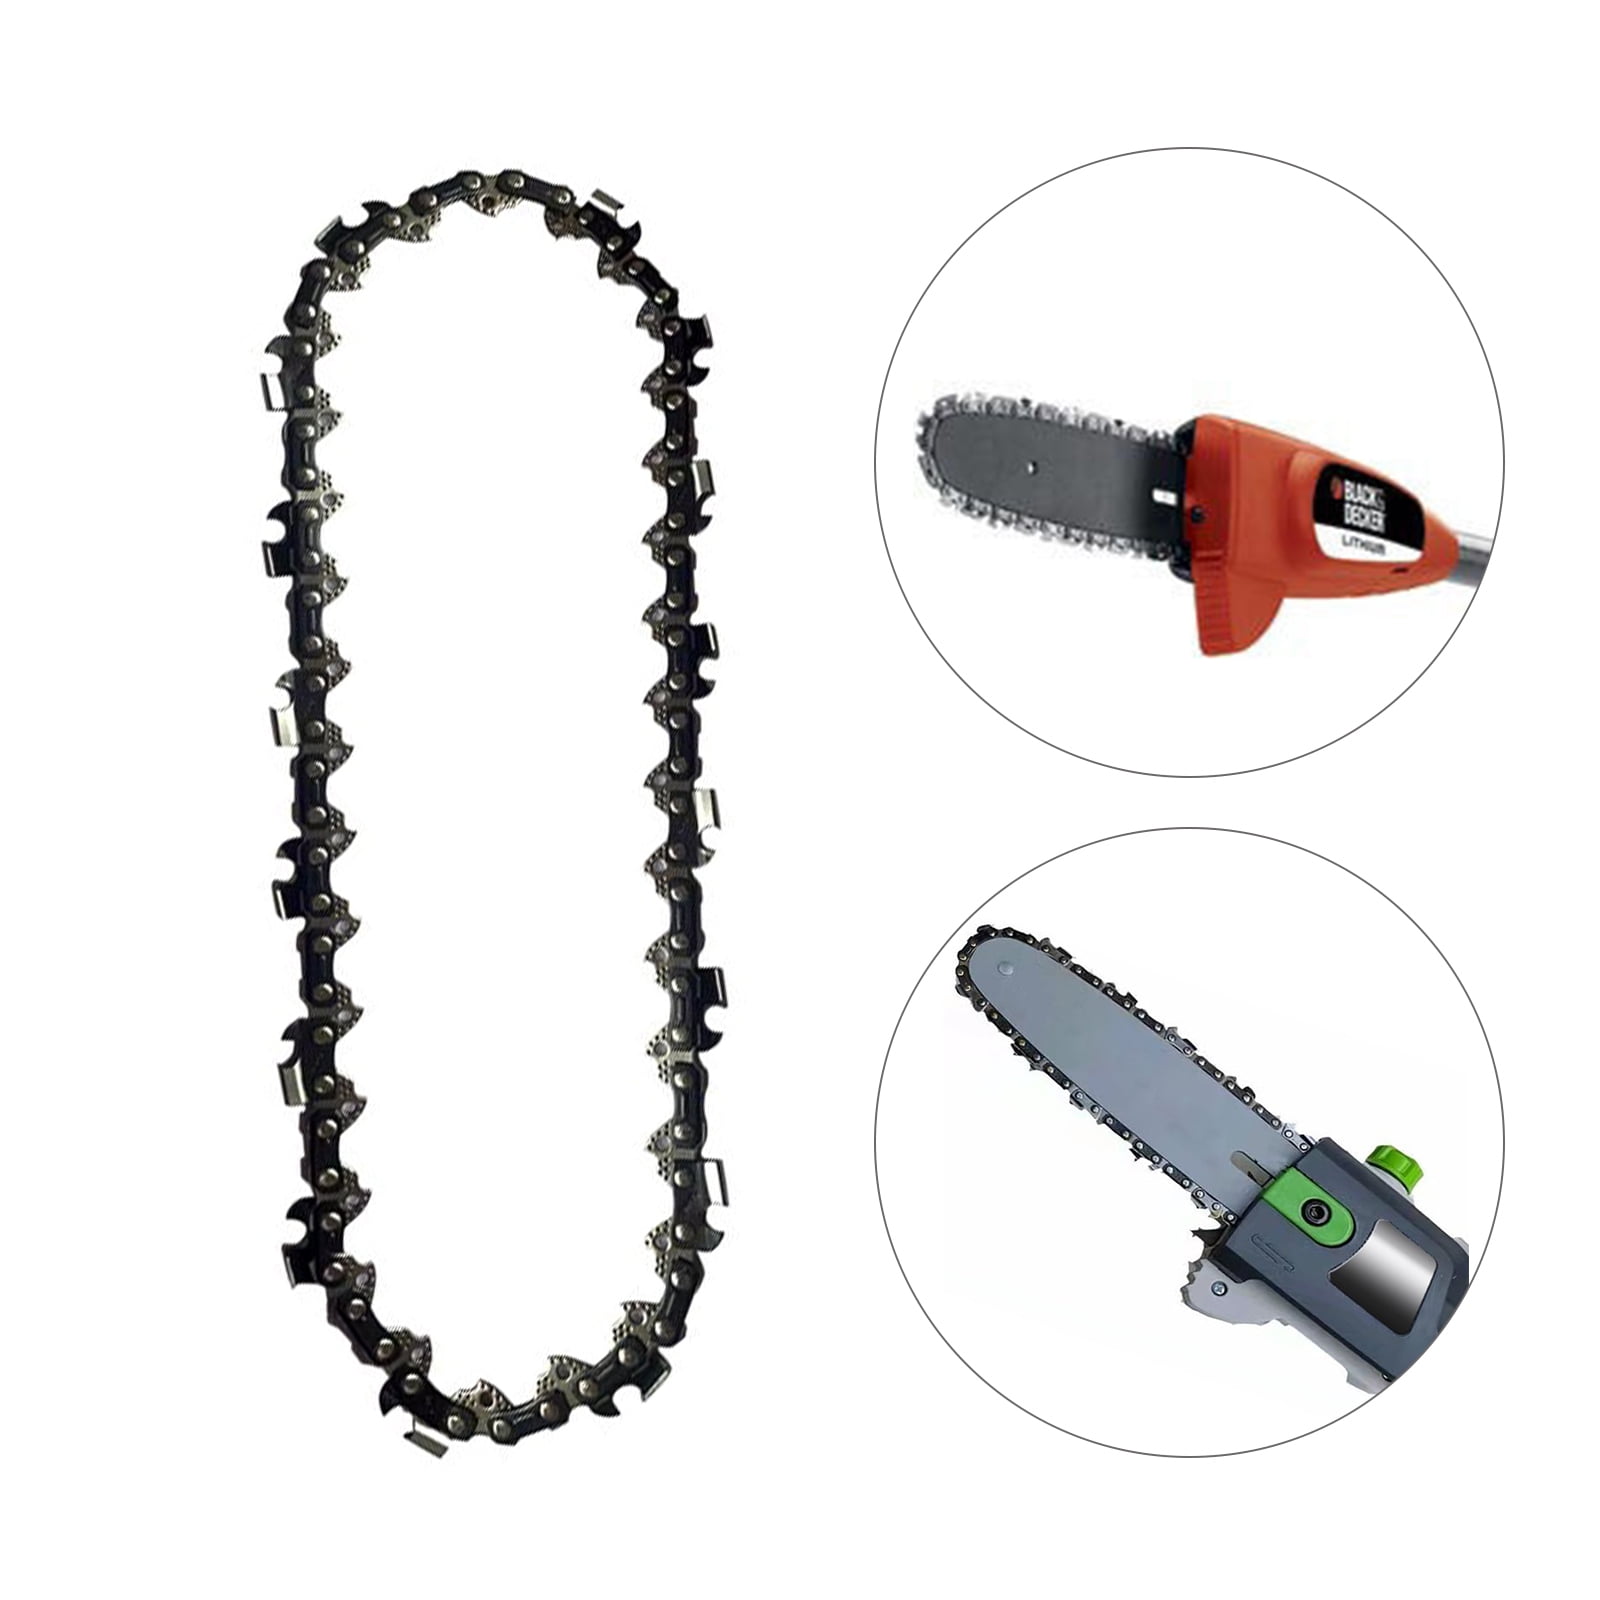 8 Inch Chainsaw Chain Replacement Chain for Black & Decker LPP120, LPP120B  Pole Saw and More - 3/8 - .043 - 34 Drive Links